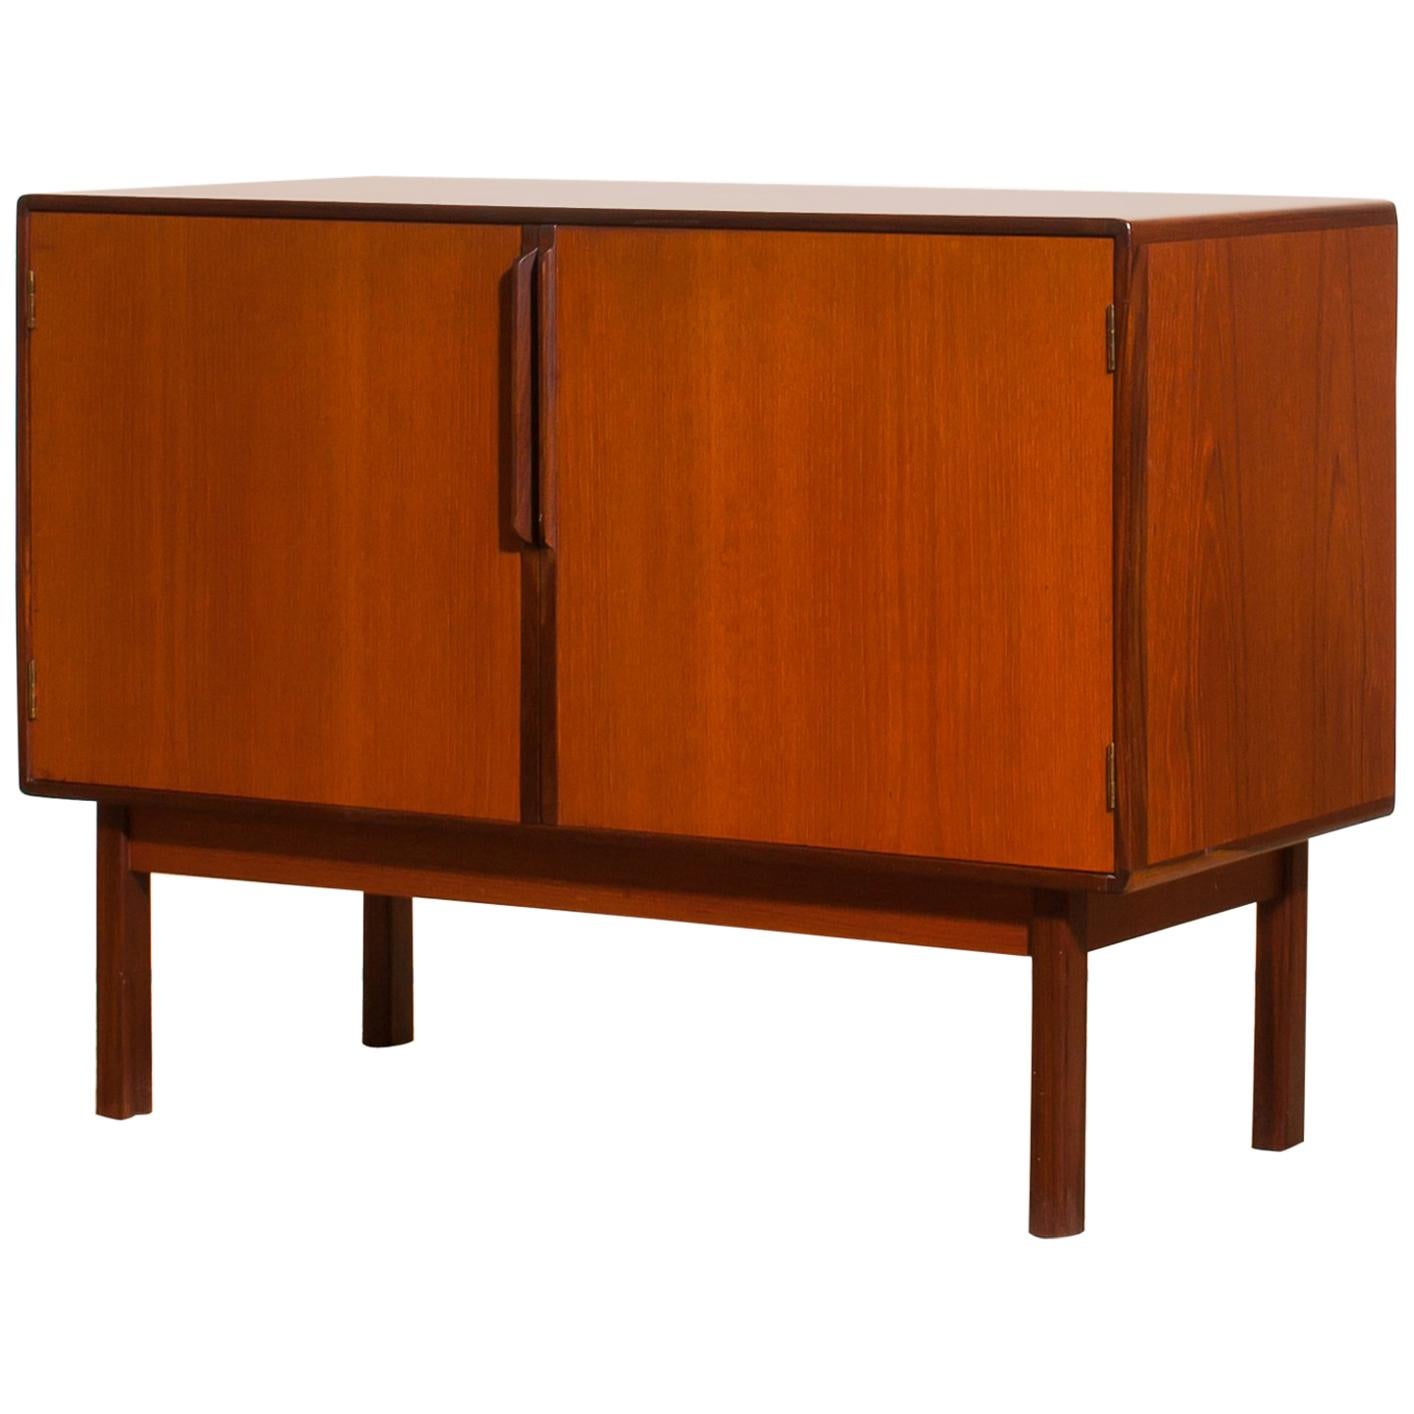 1960s, Teak and Walnut Small Sideboard Cabinet by Asko Finland